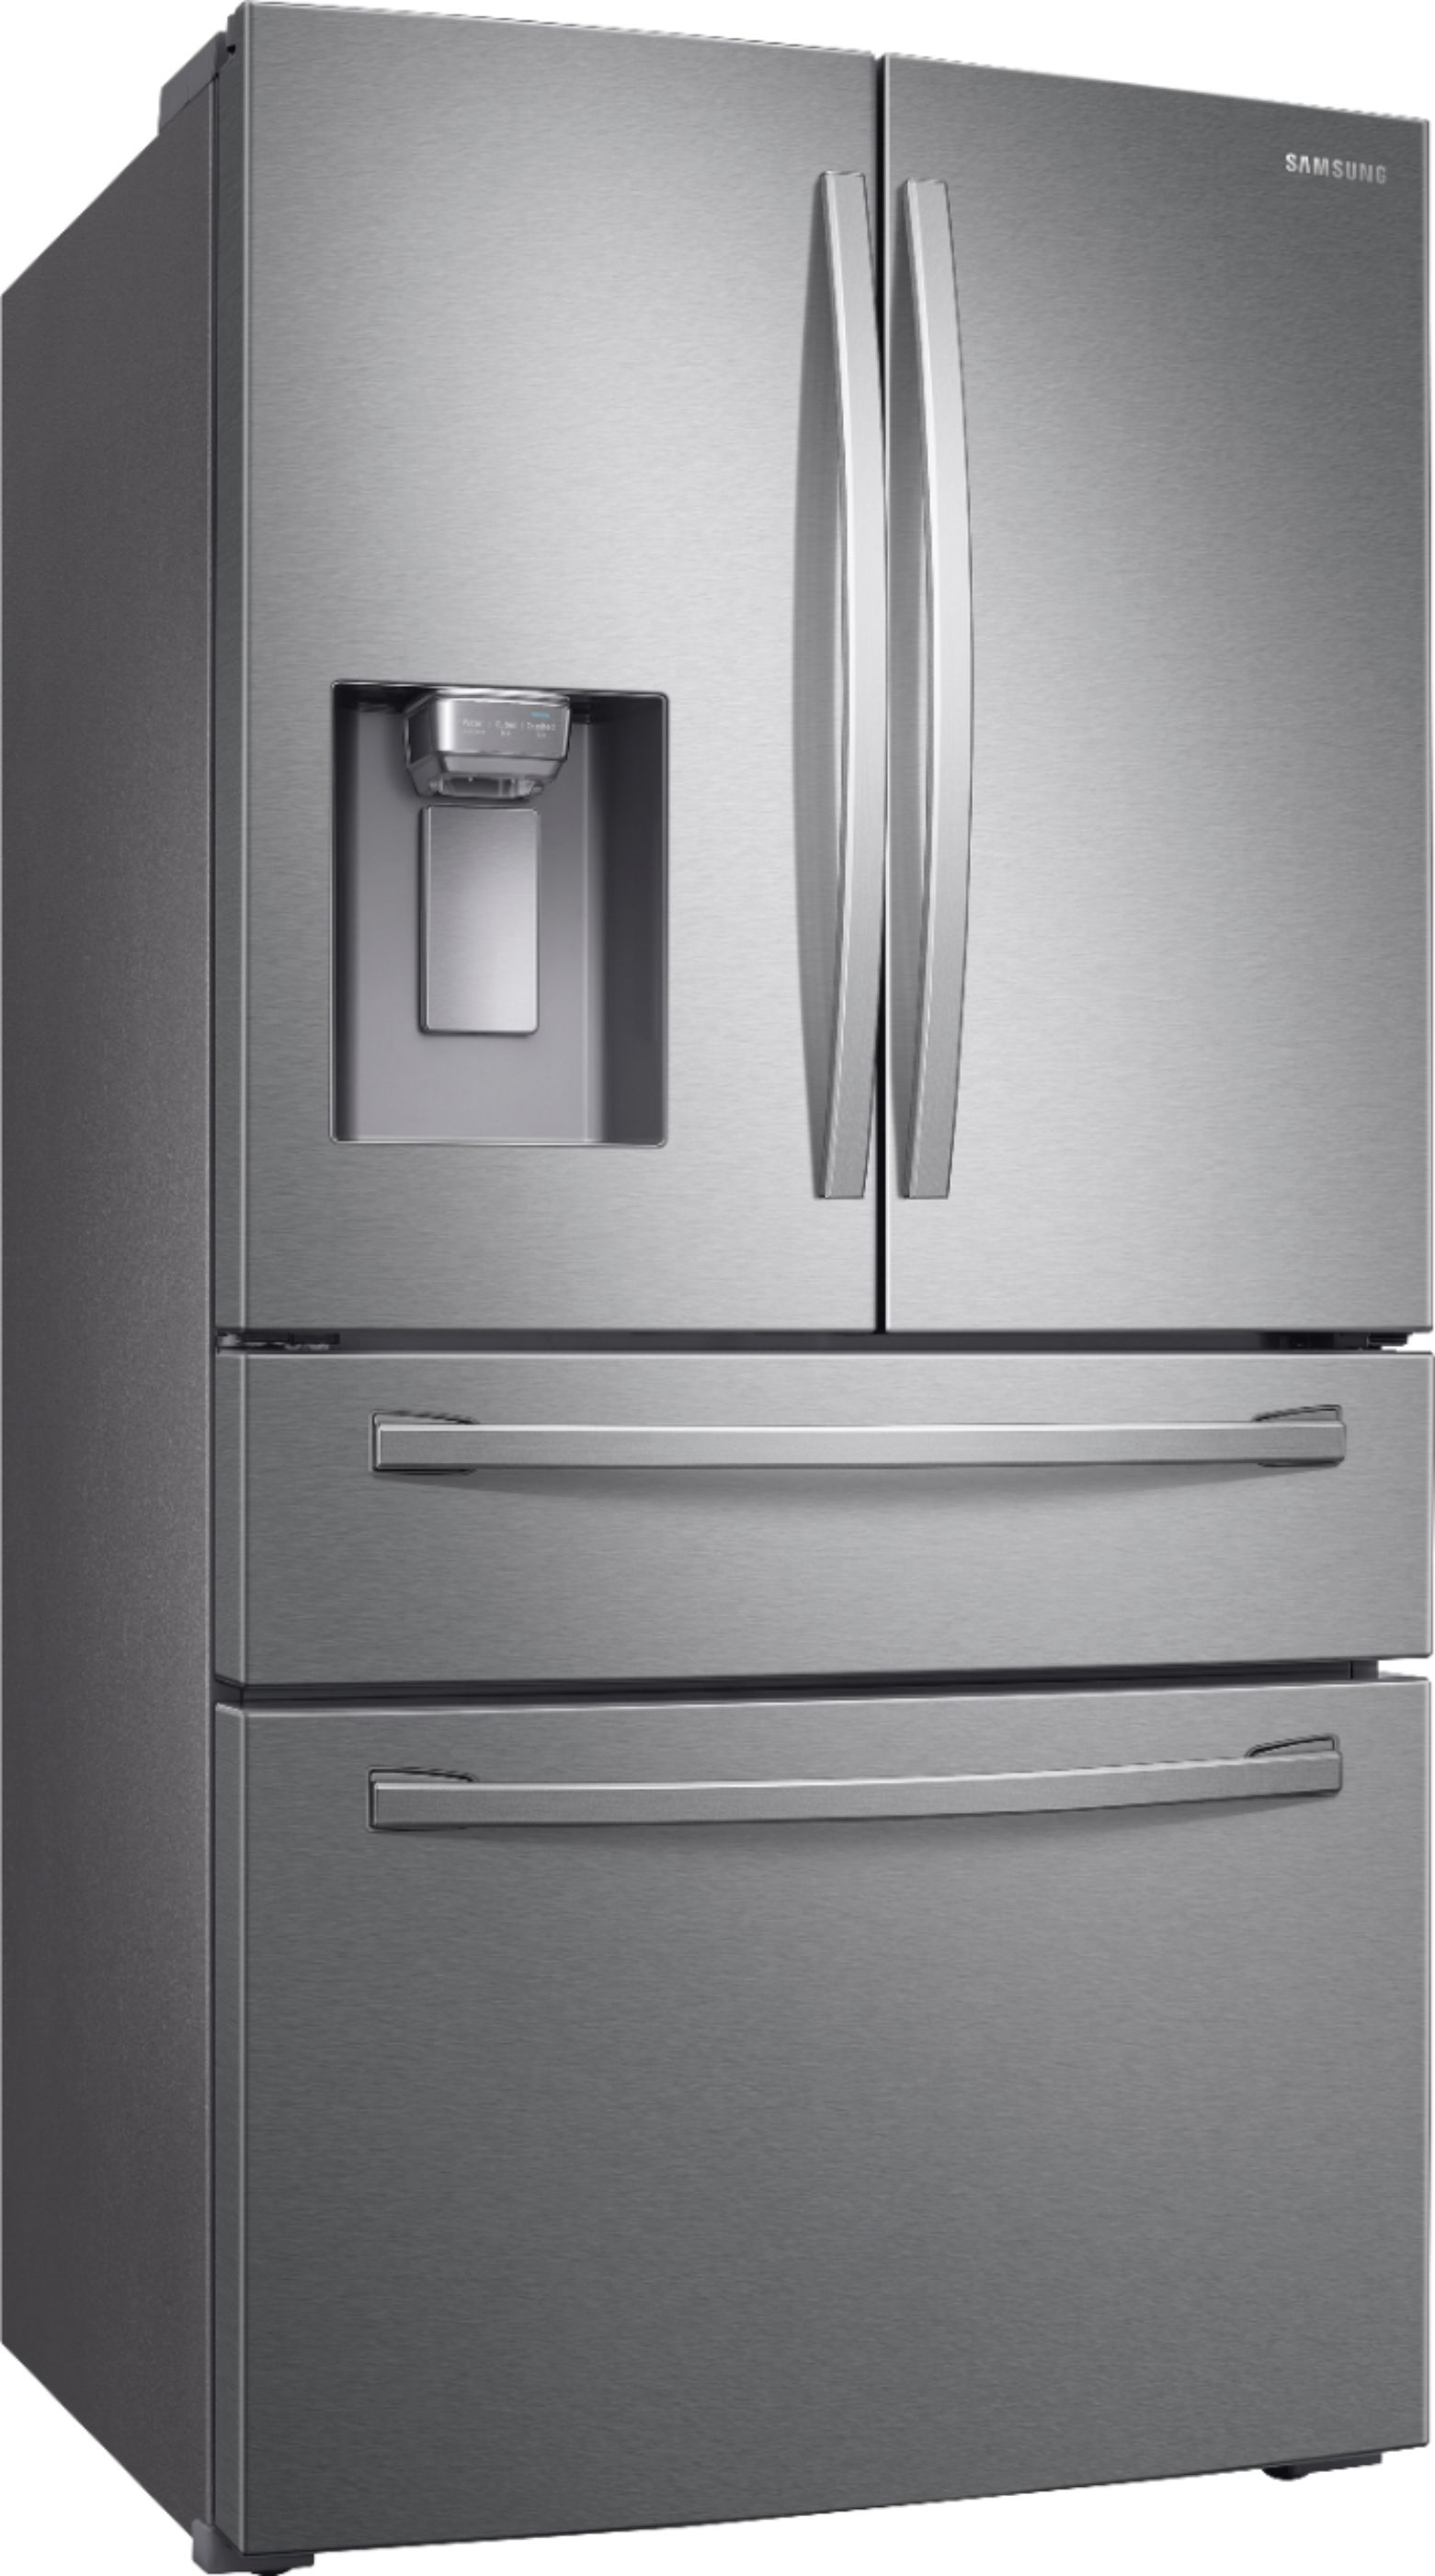 Angle View: Samsung - 28  cu. ft. 4-Door French Door Smart Refrigerator with FlexZone Drawer - Stainless Steel